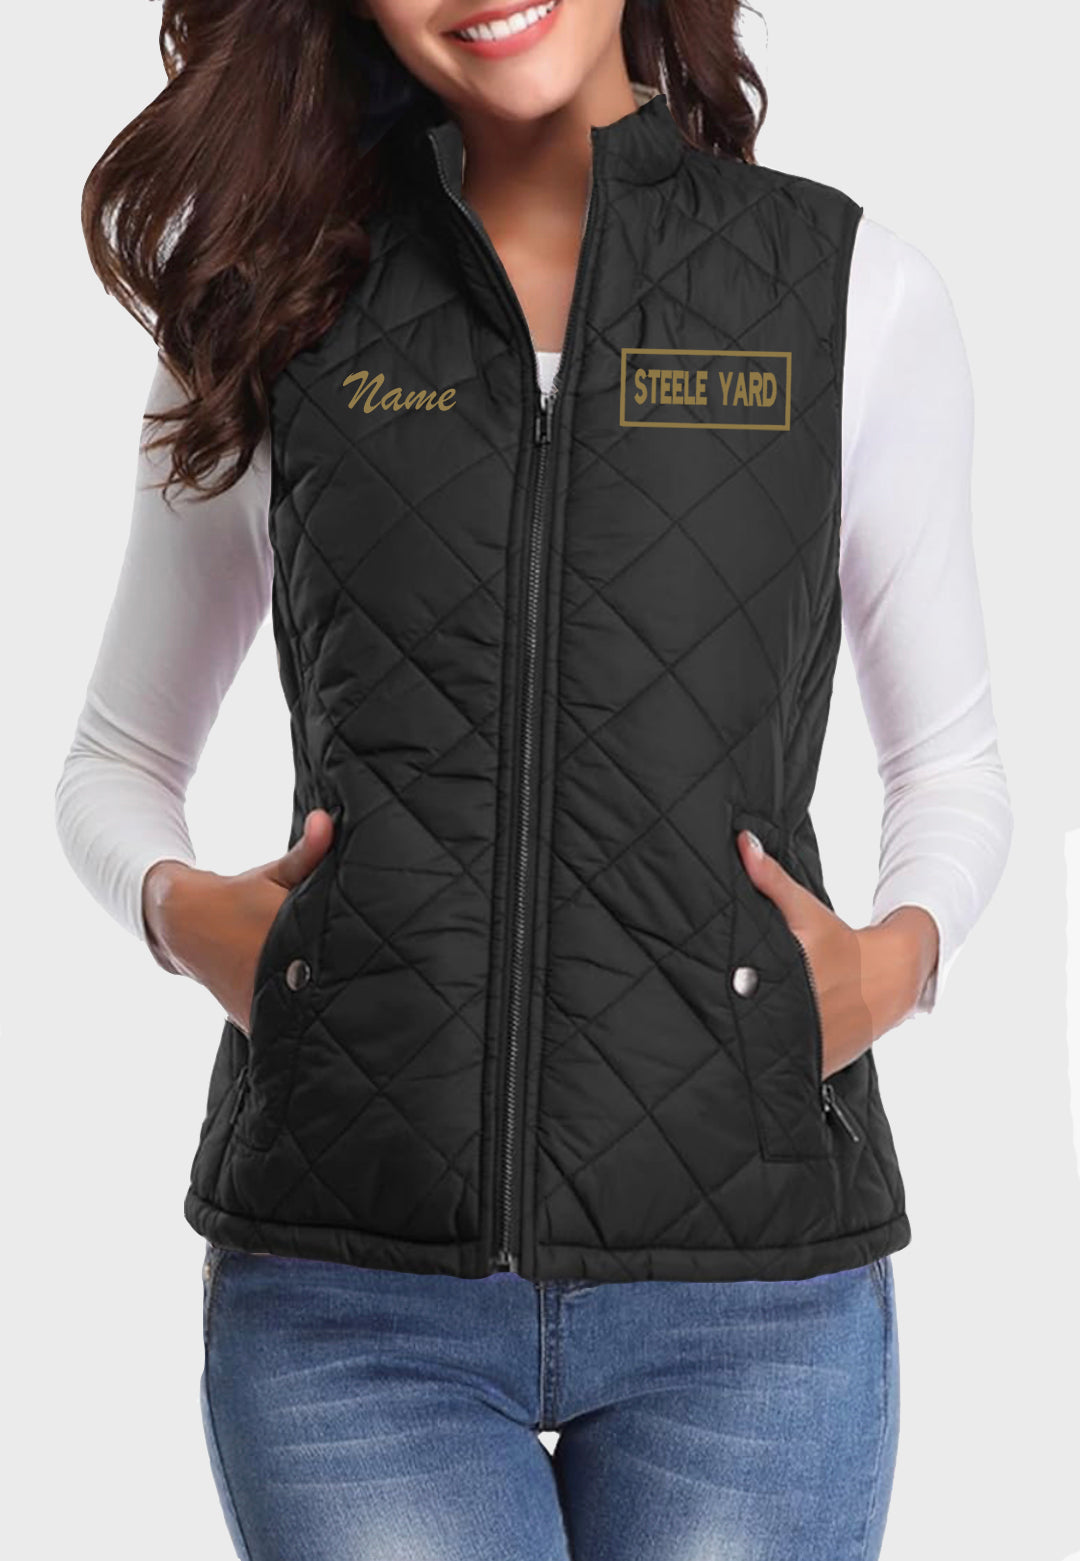 Steele Yard Fuinloth Women's Quilted Vest, 2 Color Options